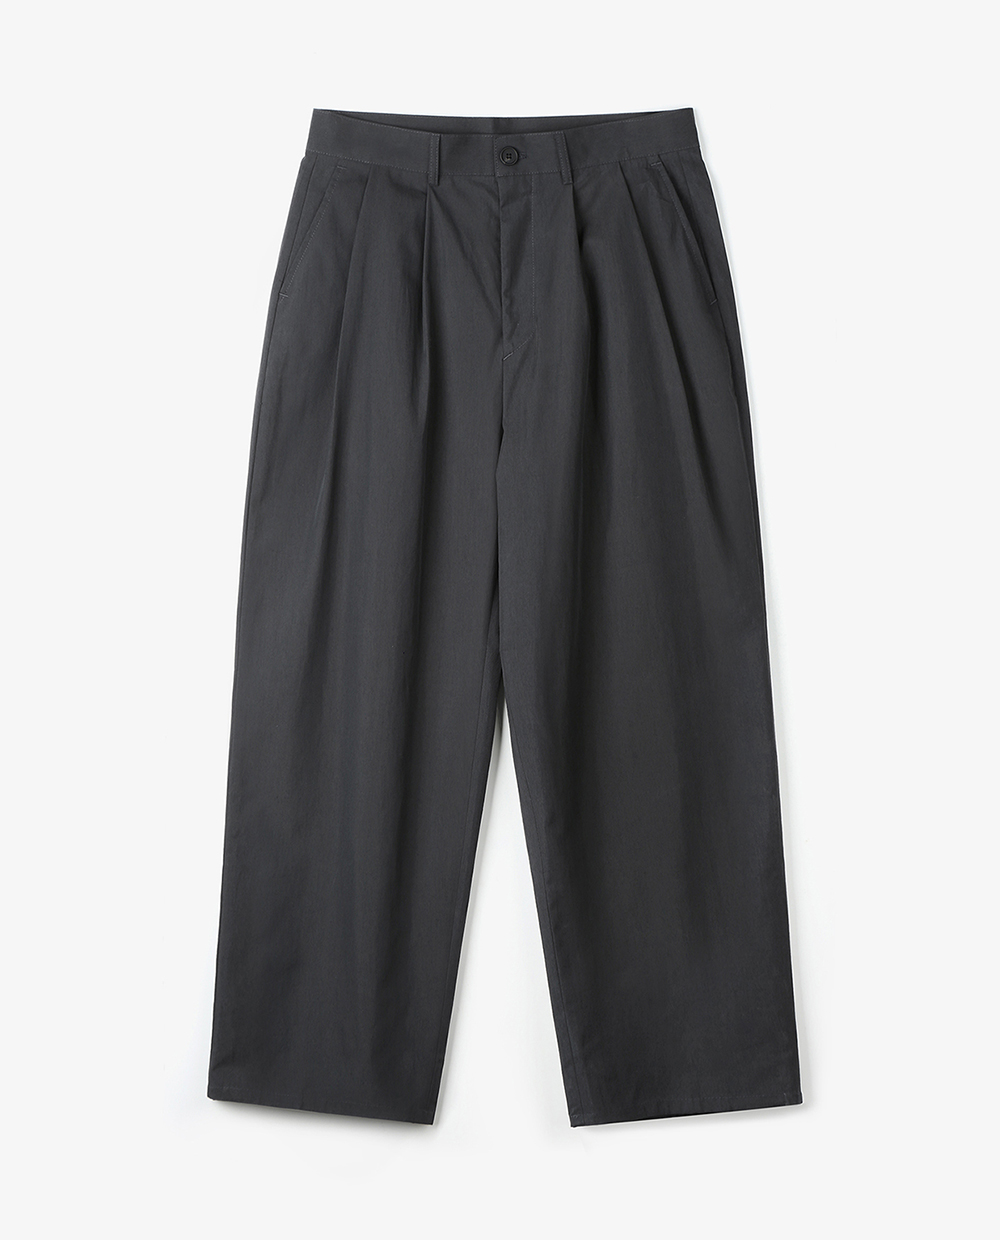 CN WIDE TWO TUCKED PANTS (CHARCOAL)